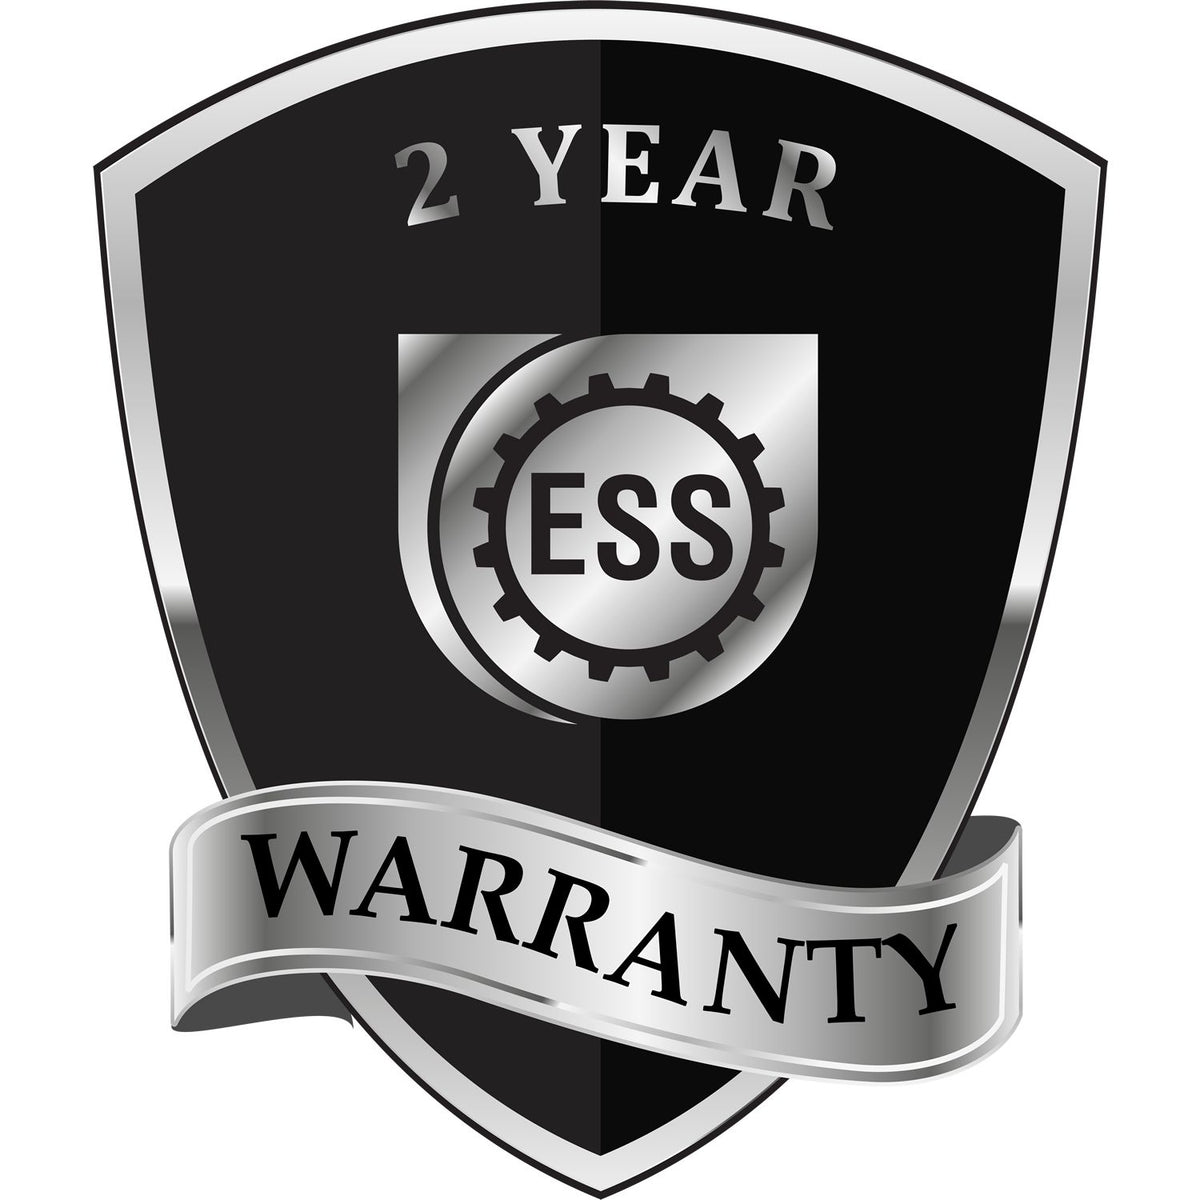 A black and silver badge or emblem showing warranty information for the Gift Kansas Engineer Seal